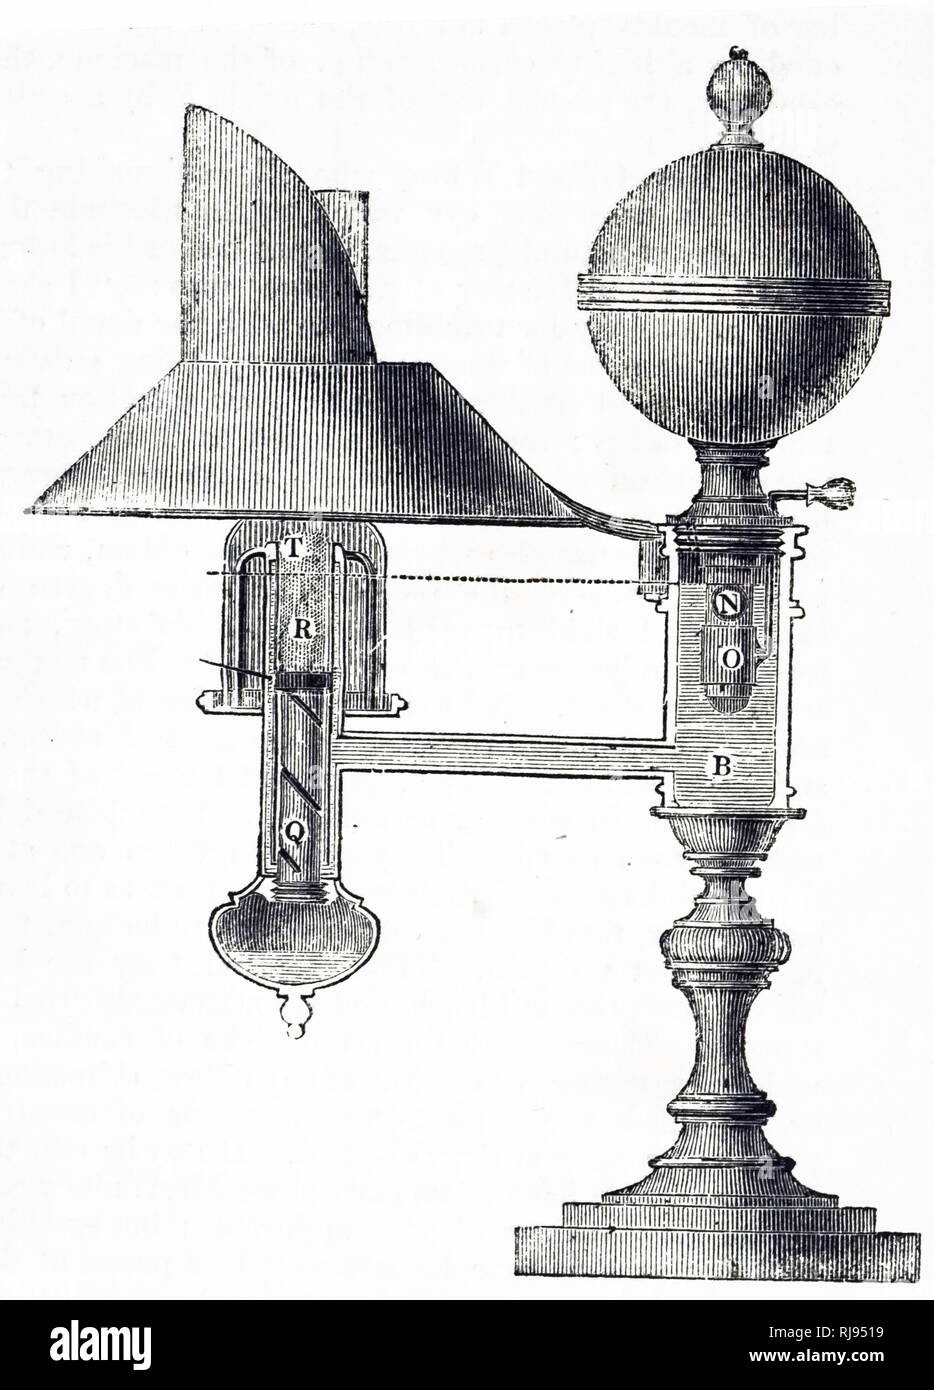 An engraving depicting a sectional view of an Argand lamp, a kind of oil  lamp, was invented and patented in 1780 by Aime Argand. Aime Argand  (1750-1803) a Genevan physicist and chemist.